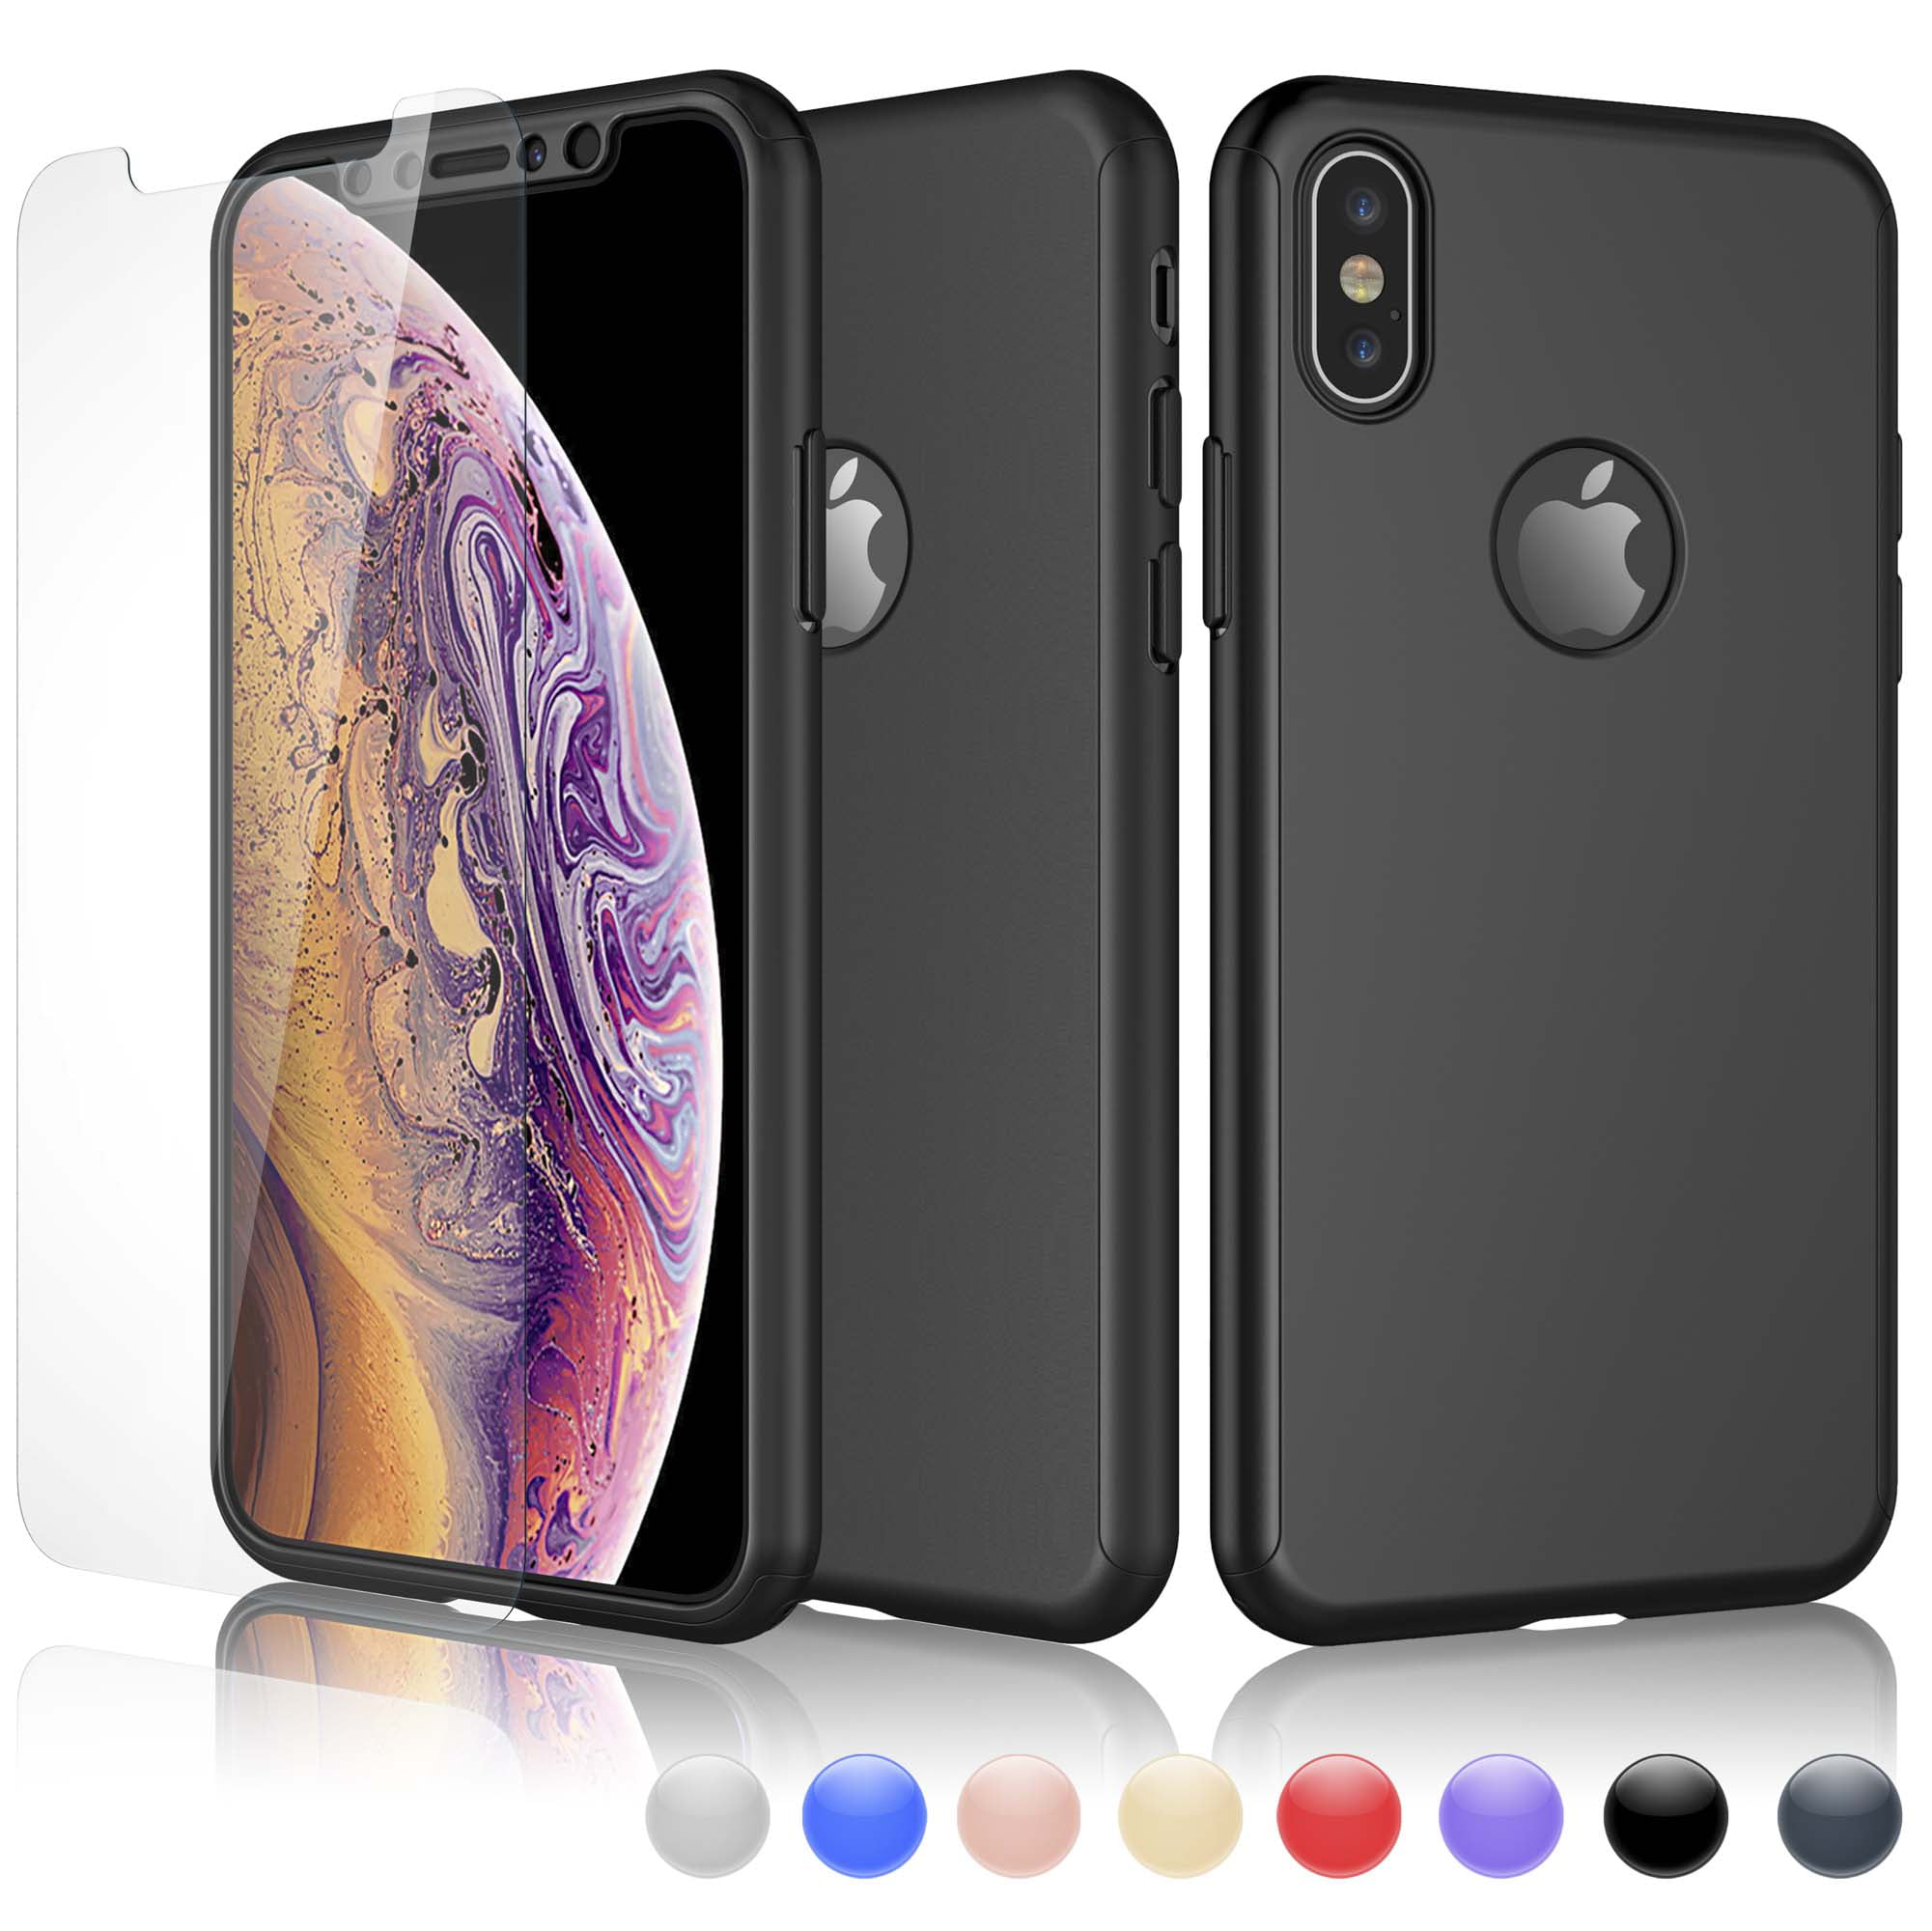 Clear Tempered Glass Back Full Body Built-in Privacy Screen Protector Slim Fit Ultra-Thin Case Lightweight, iPhone X/Xs Case, Black Magnetic Adsorption Metal Frame for iPhone X/Xs